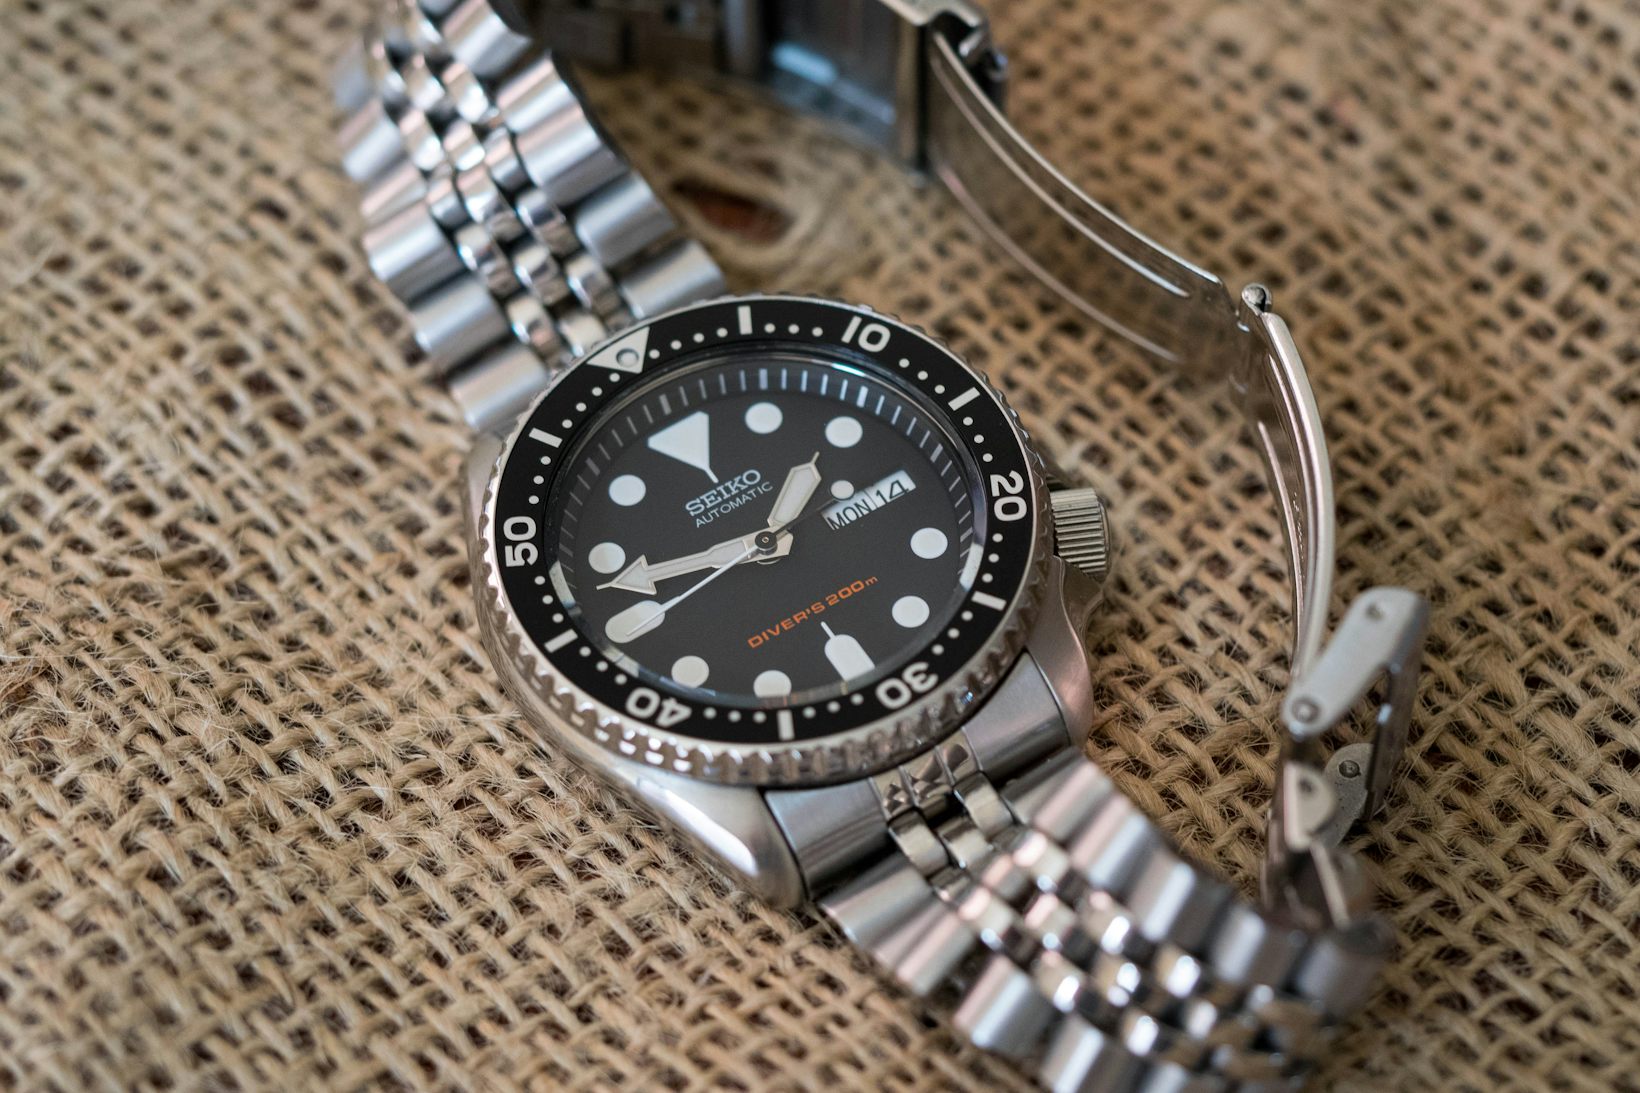 Lad os gøre det synd En nat The SKX007 King of value-packed dive watches